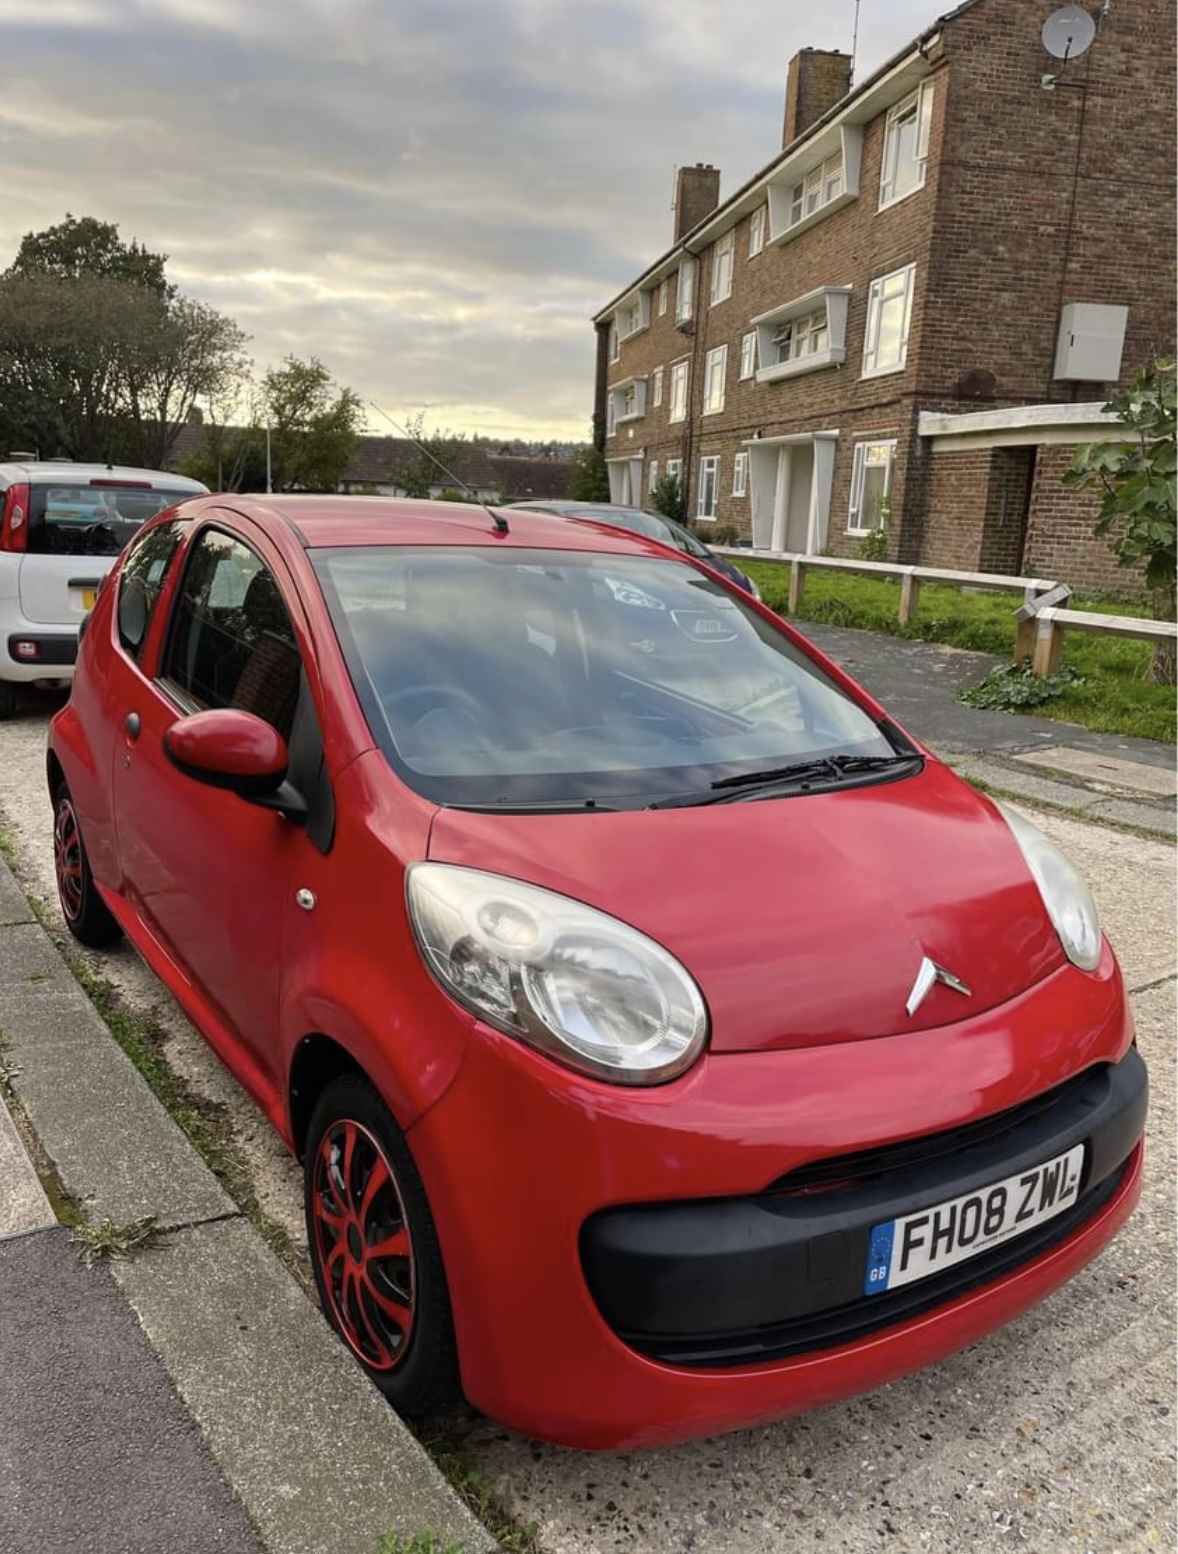 Photograph of FH08 ZWL - a Red Citroen C1 parked in Hollingdean by a non-resident and stored here whilst a dodgy car dealer attempts to sell it. The second of five photographs supplied by the residents of Hollingdean.